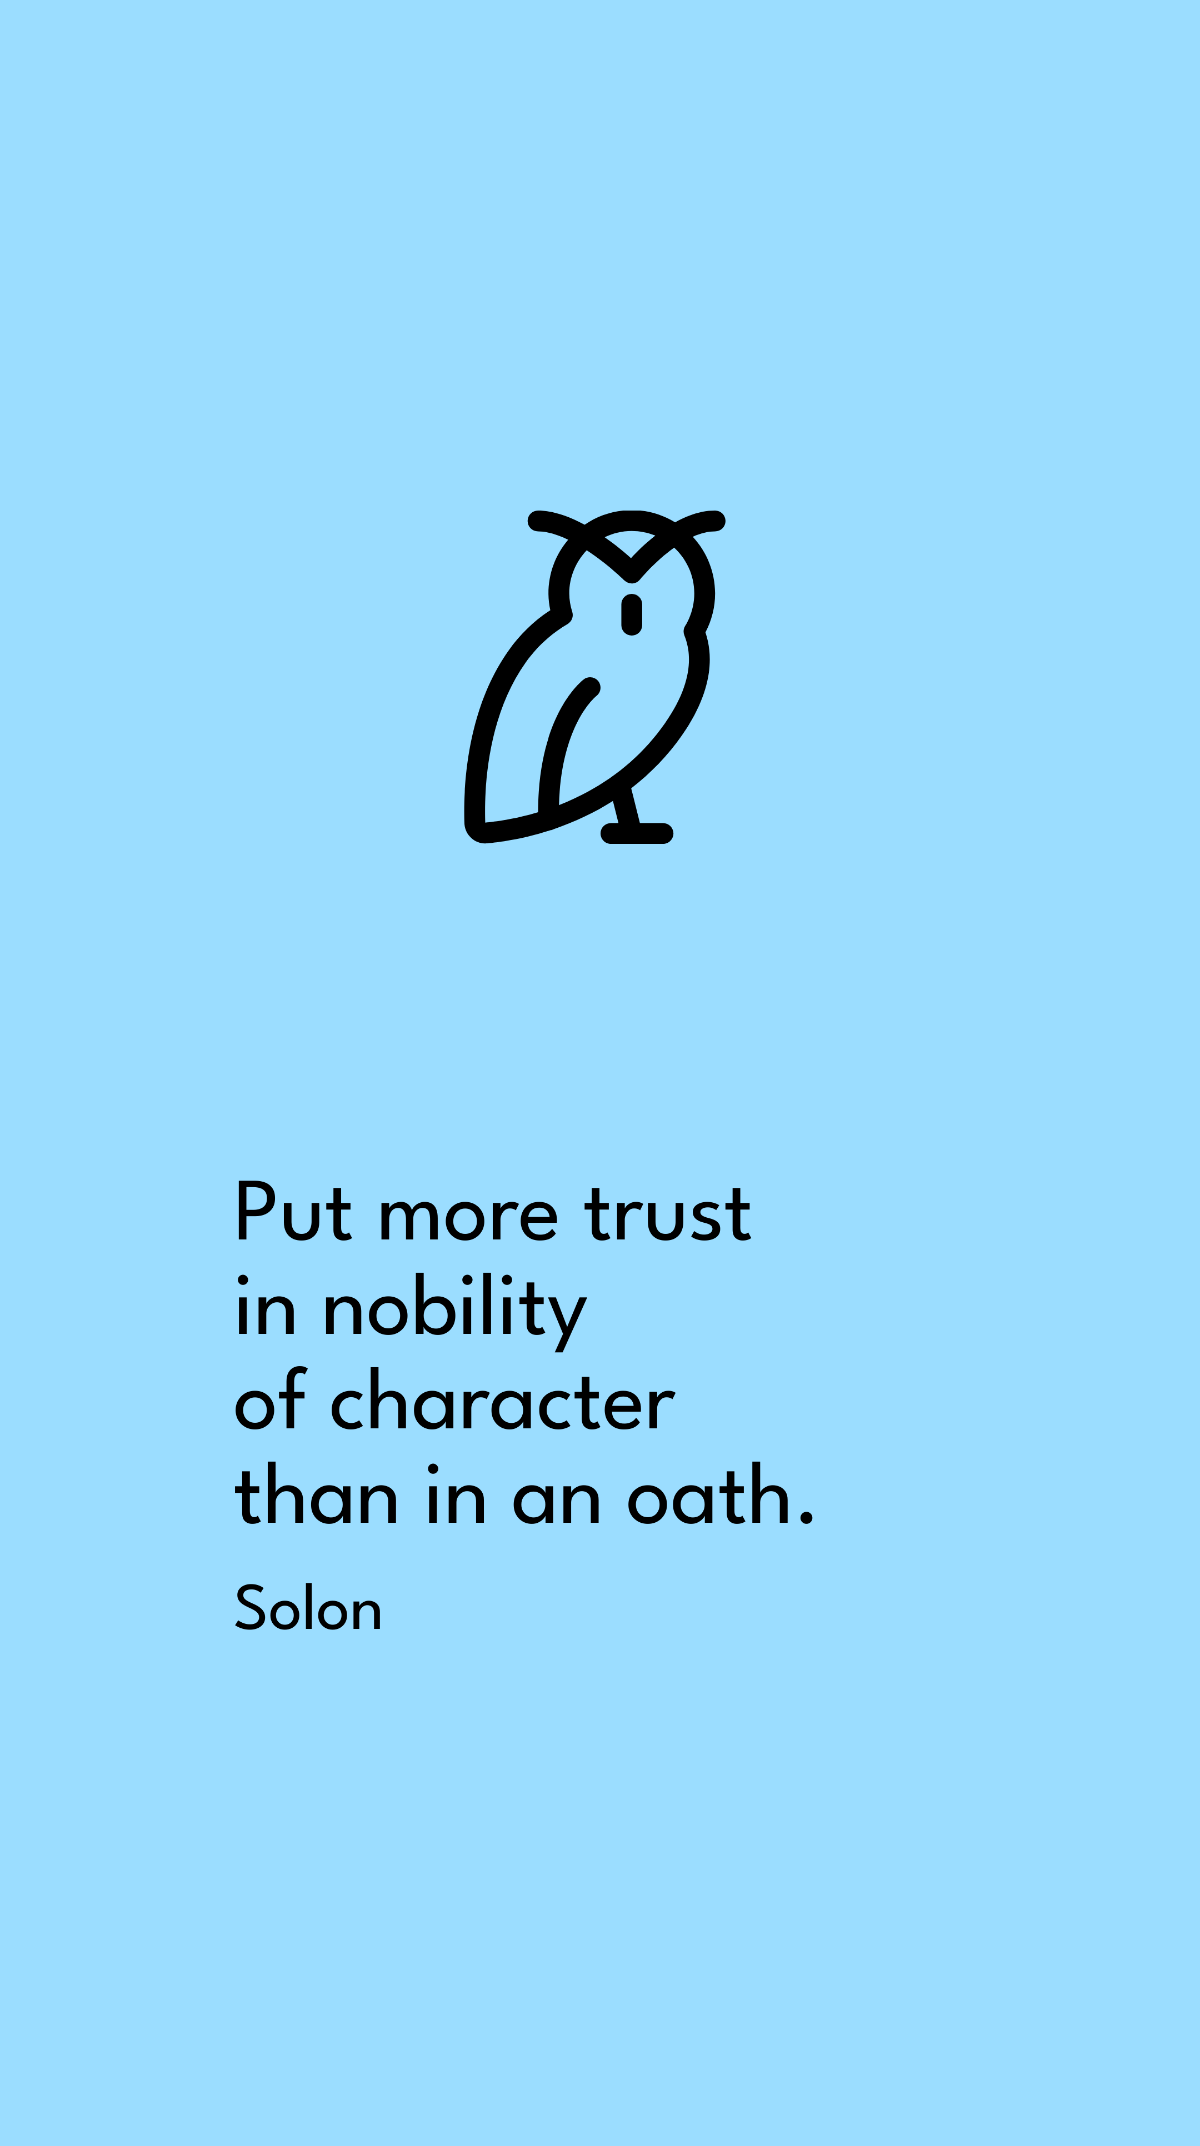 Solon - Put more trust in nobility of character than in an oath.